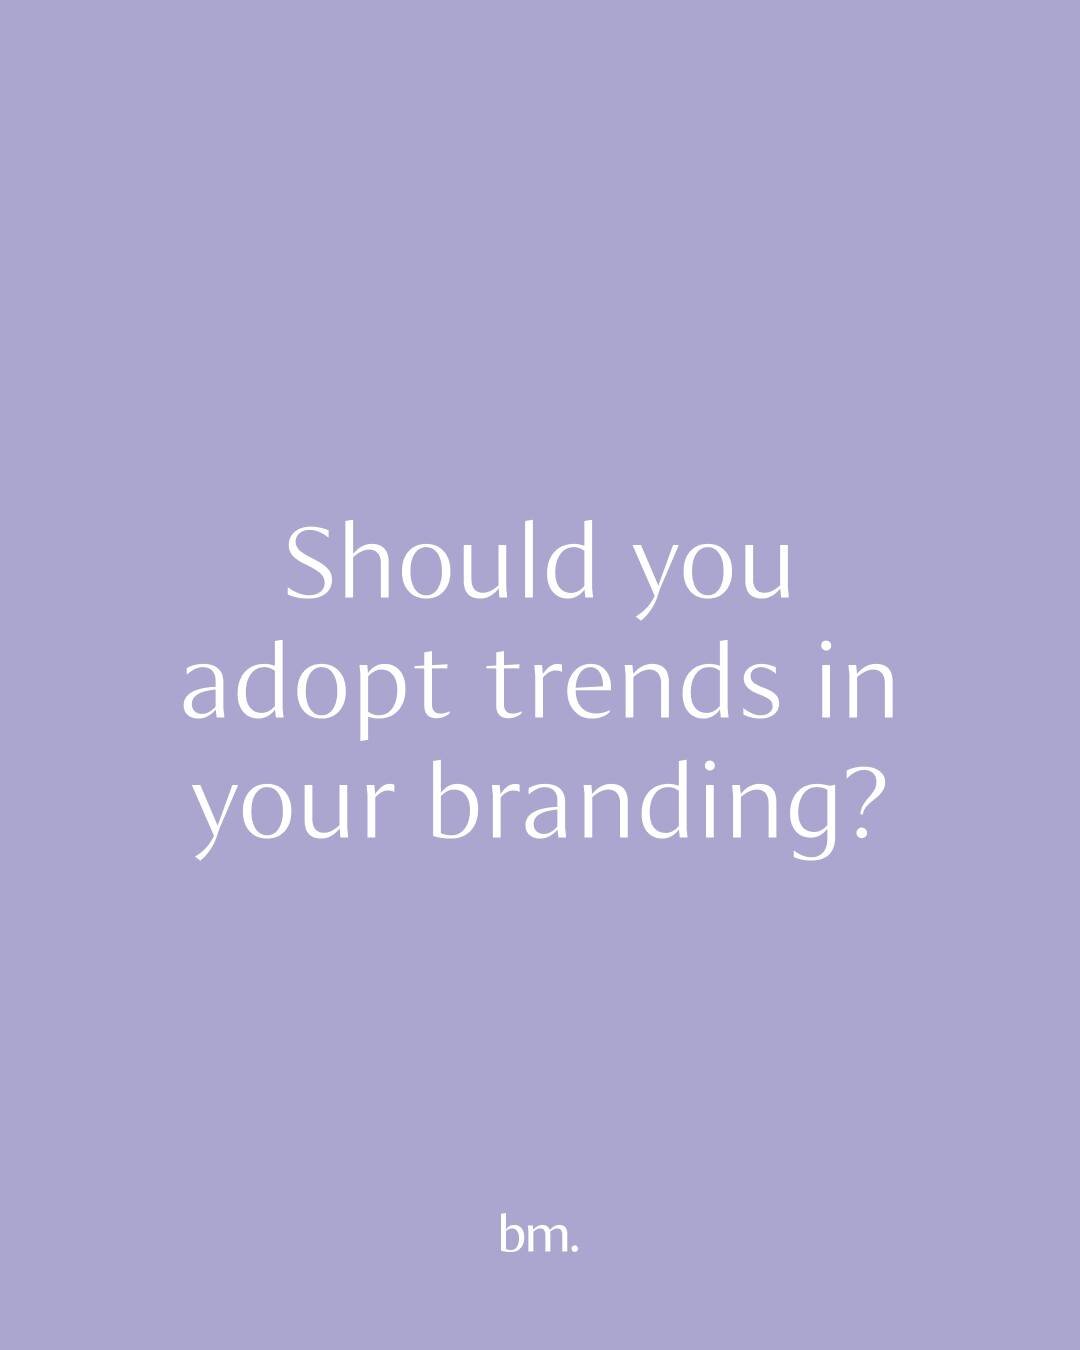 So lavender is the colour of the season and you really want to include it in your branding, but should you?

While it can be tempting to follow trends in the branding process, it's essential to approach trend adoption with caution

Incorporate trends